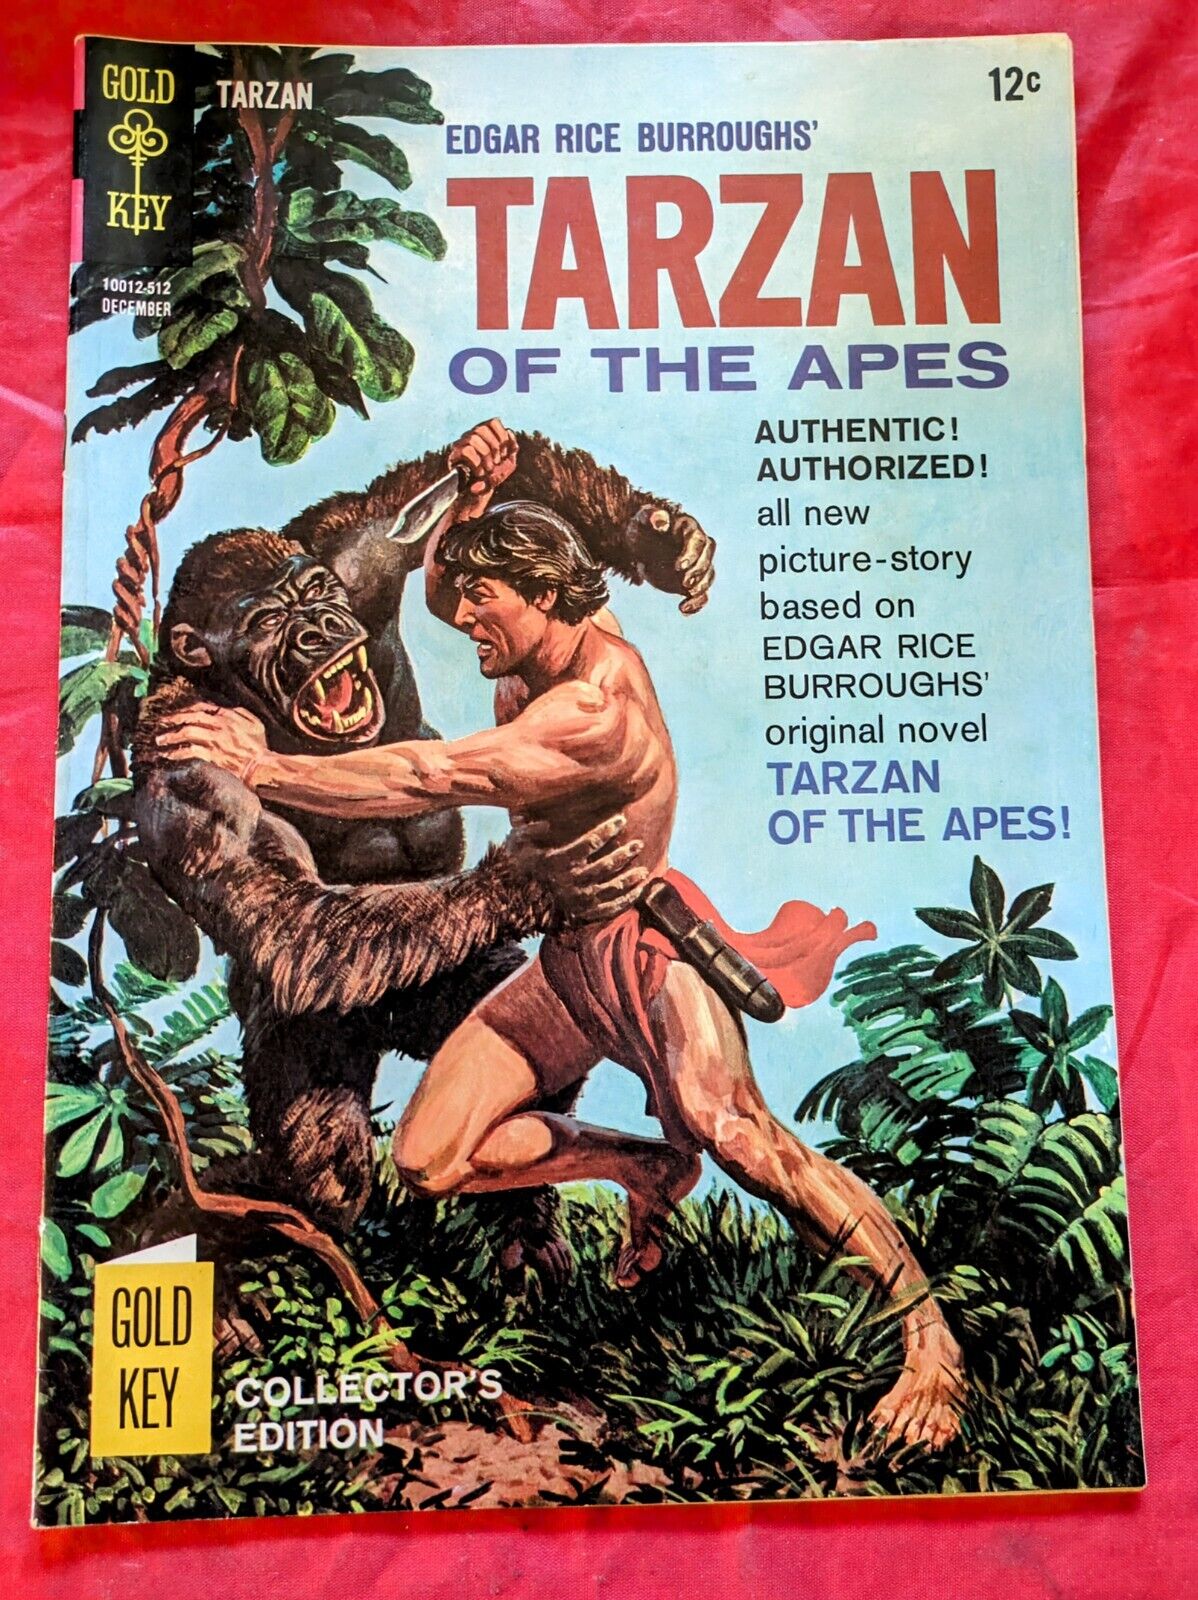 VTG Tarzan Of The Apes #155  Gold Key Comics 1965 FN+ VF- EXCELLENT CONDITION